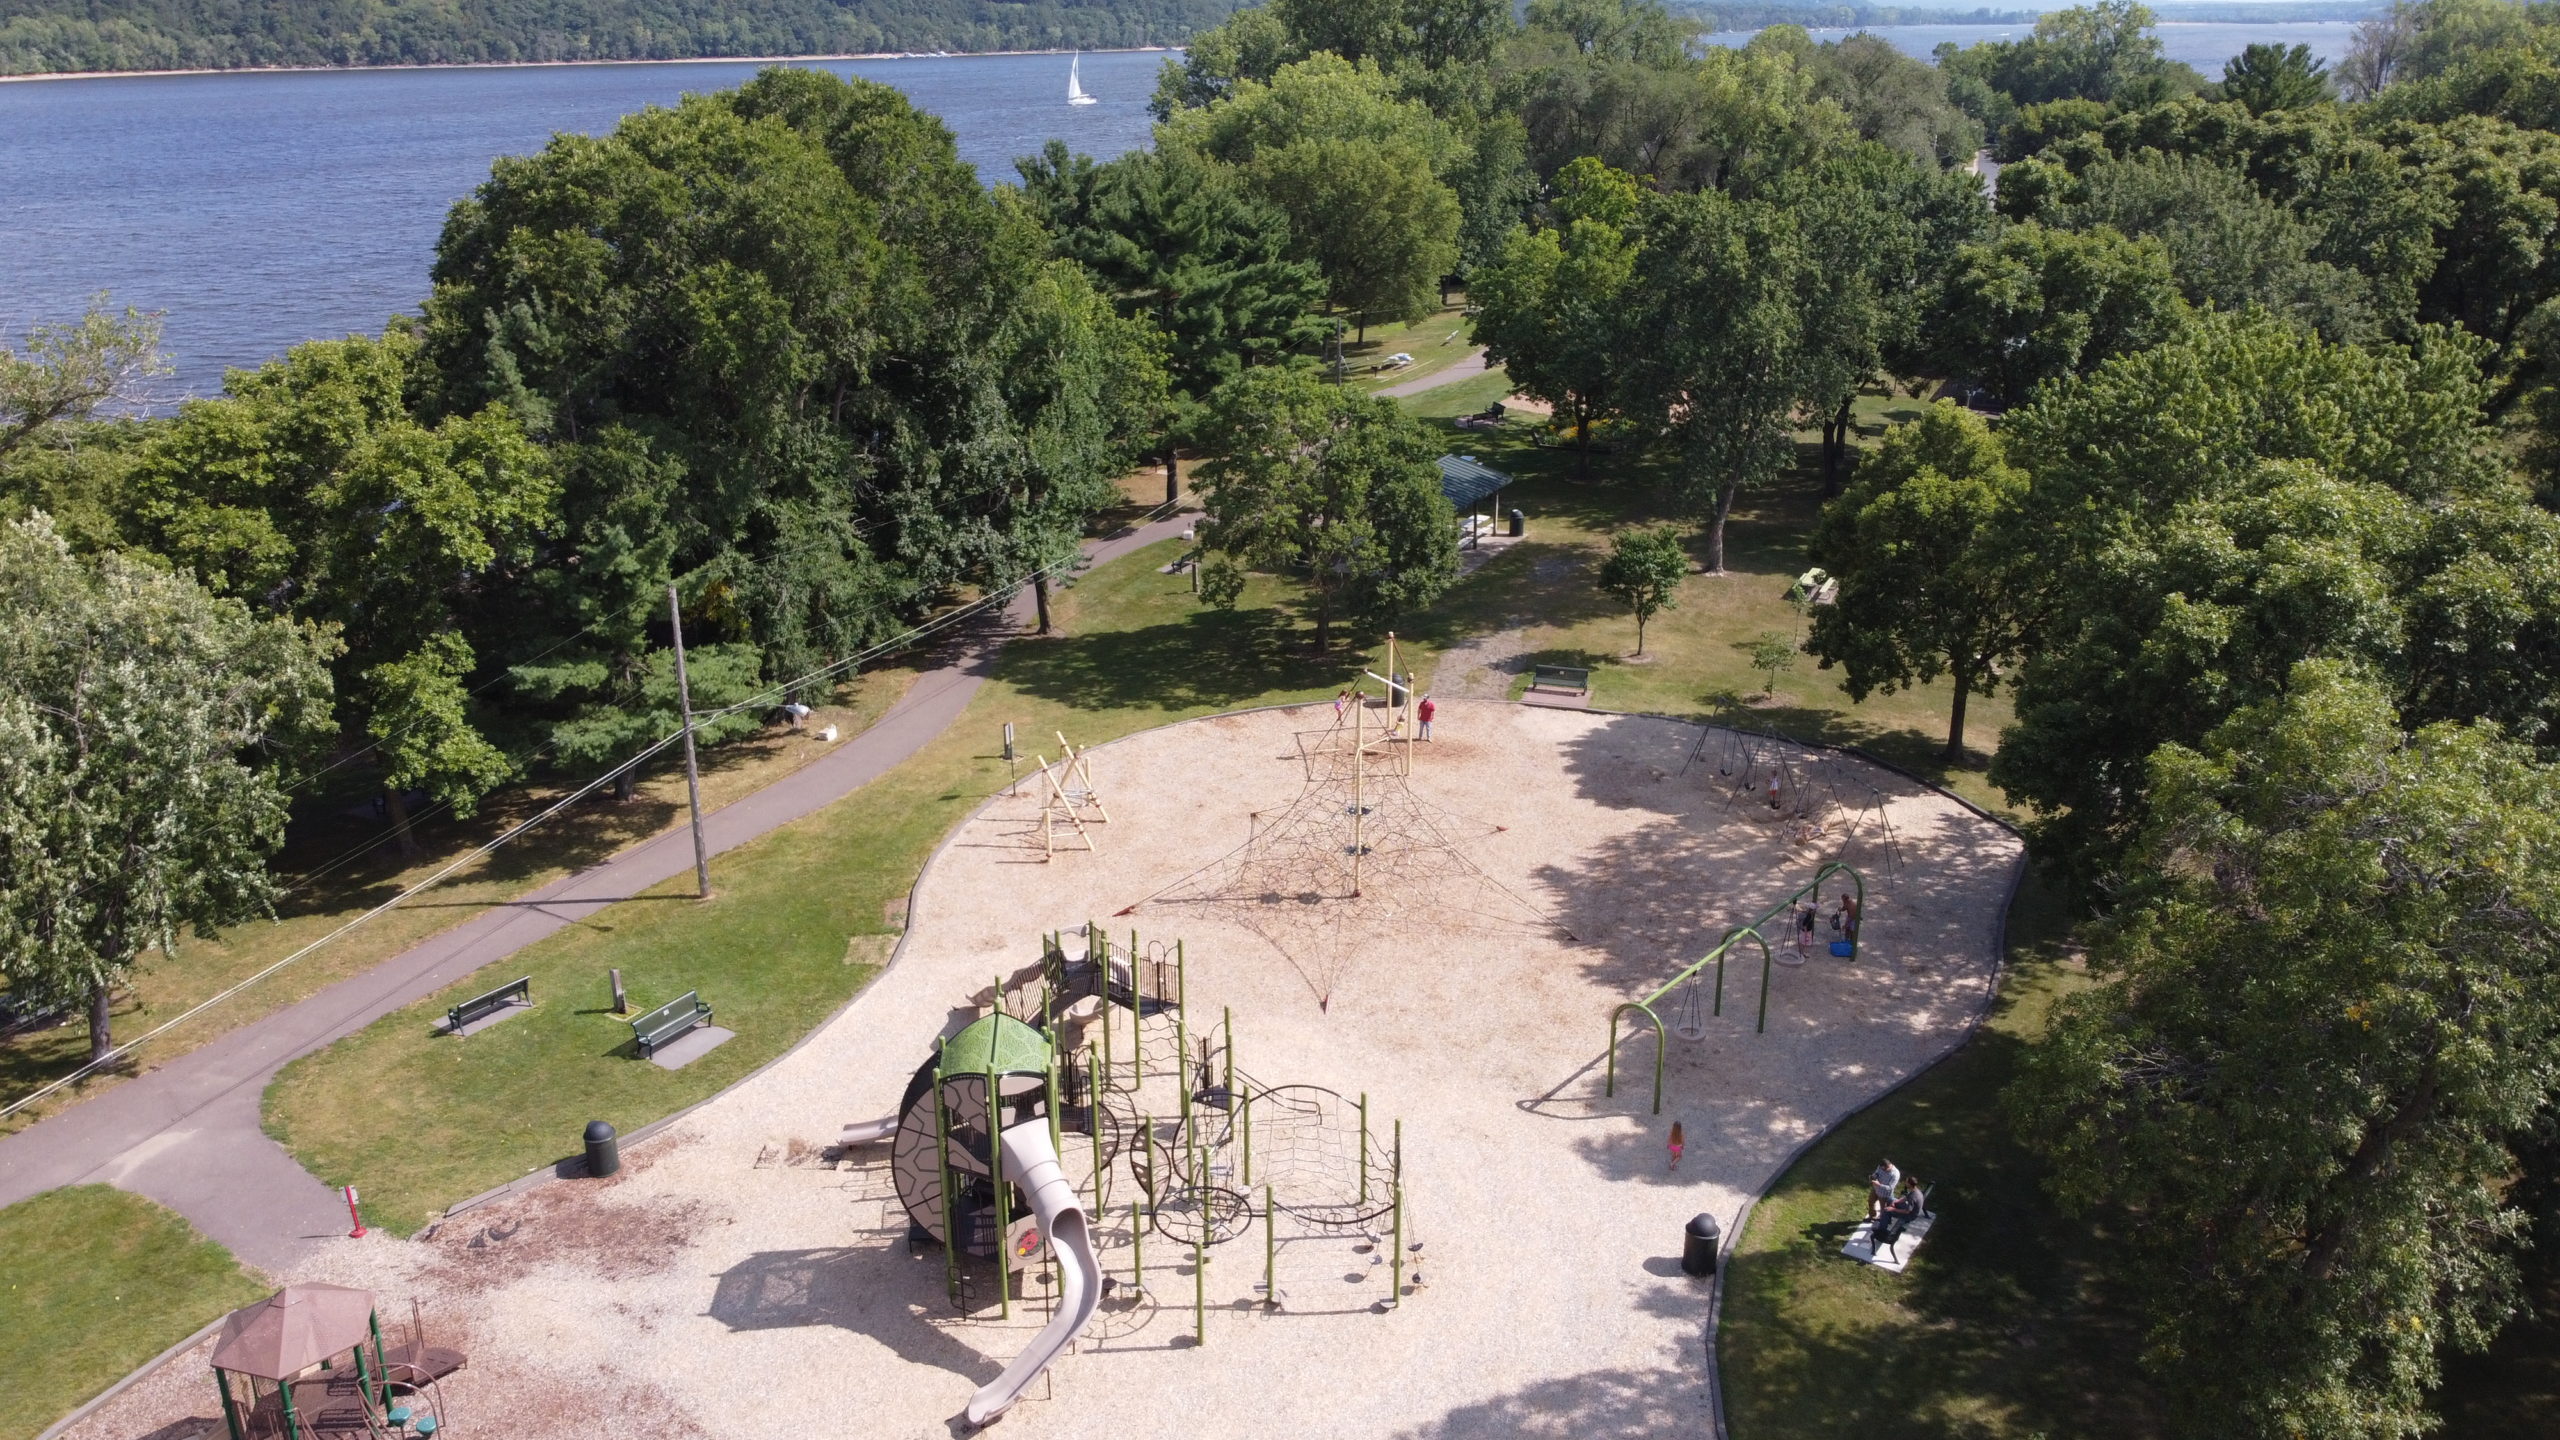 Unique Minnesota Playground at Lakeside Park in Bayport, MN